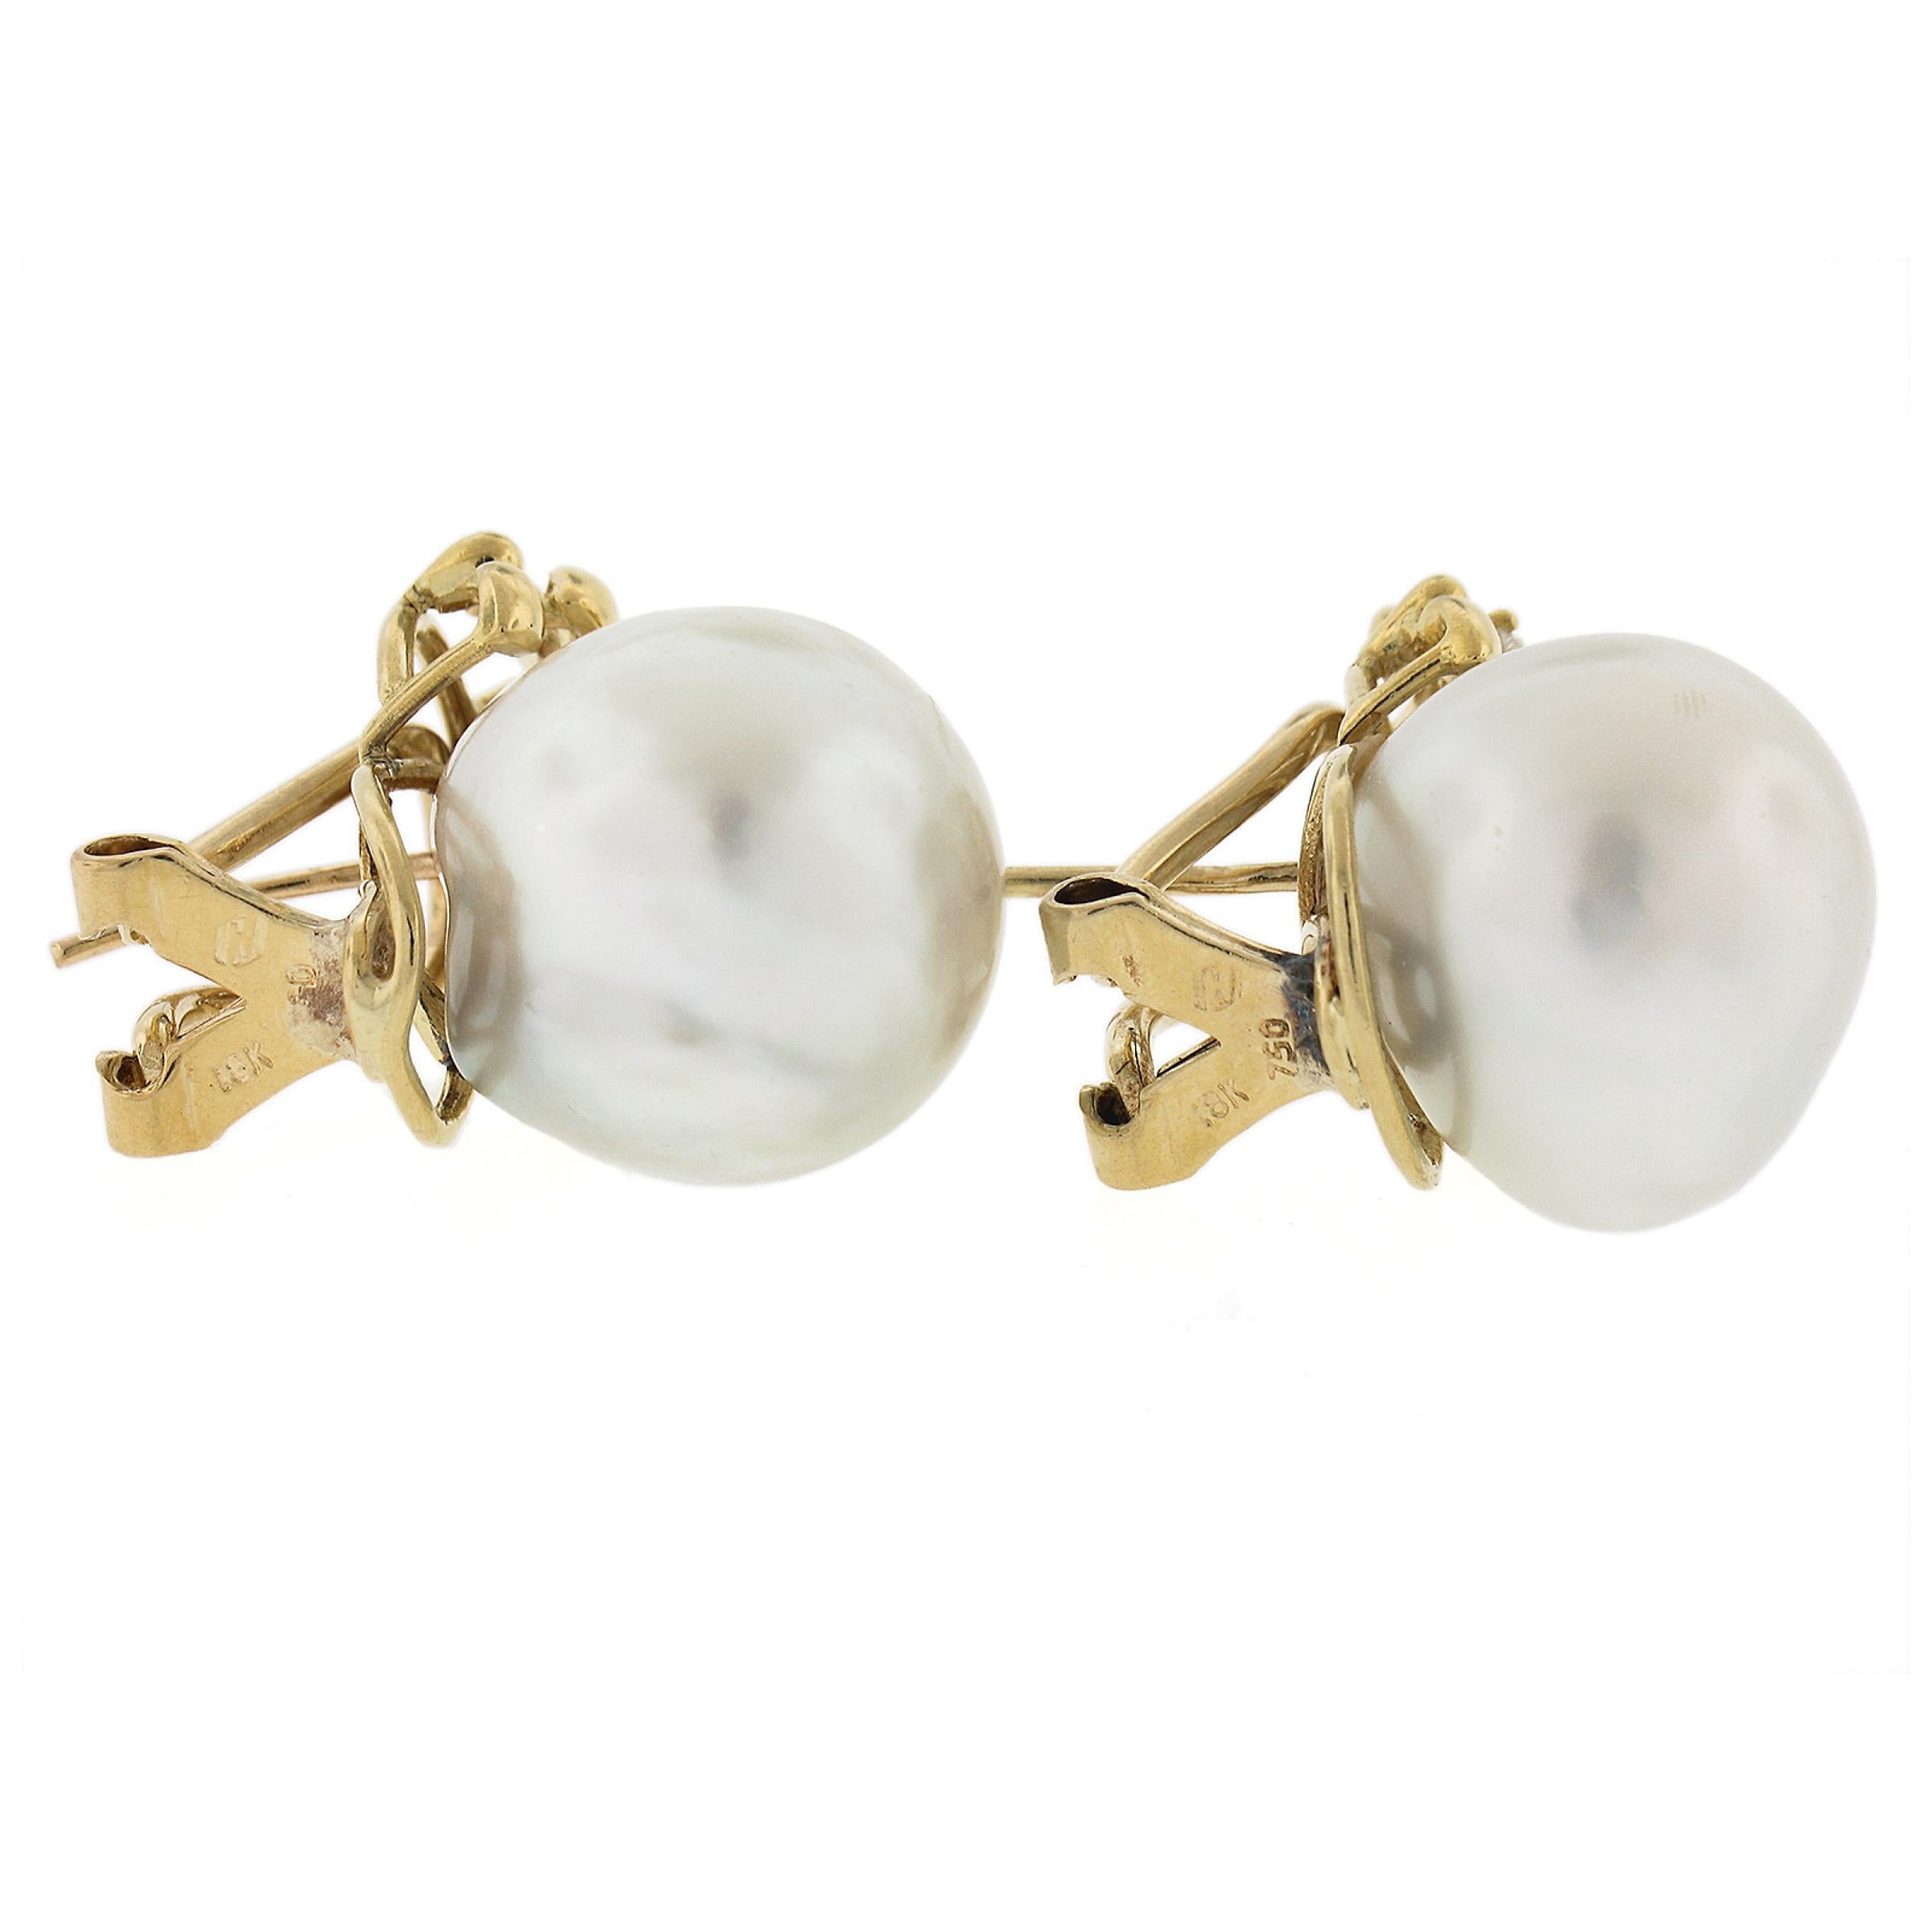 Vintage 18K Yellow Gold 14mm South Sea Pearls w/ 0.20ctw Diamonds Omega Earrings For Sale 2